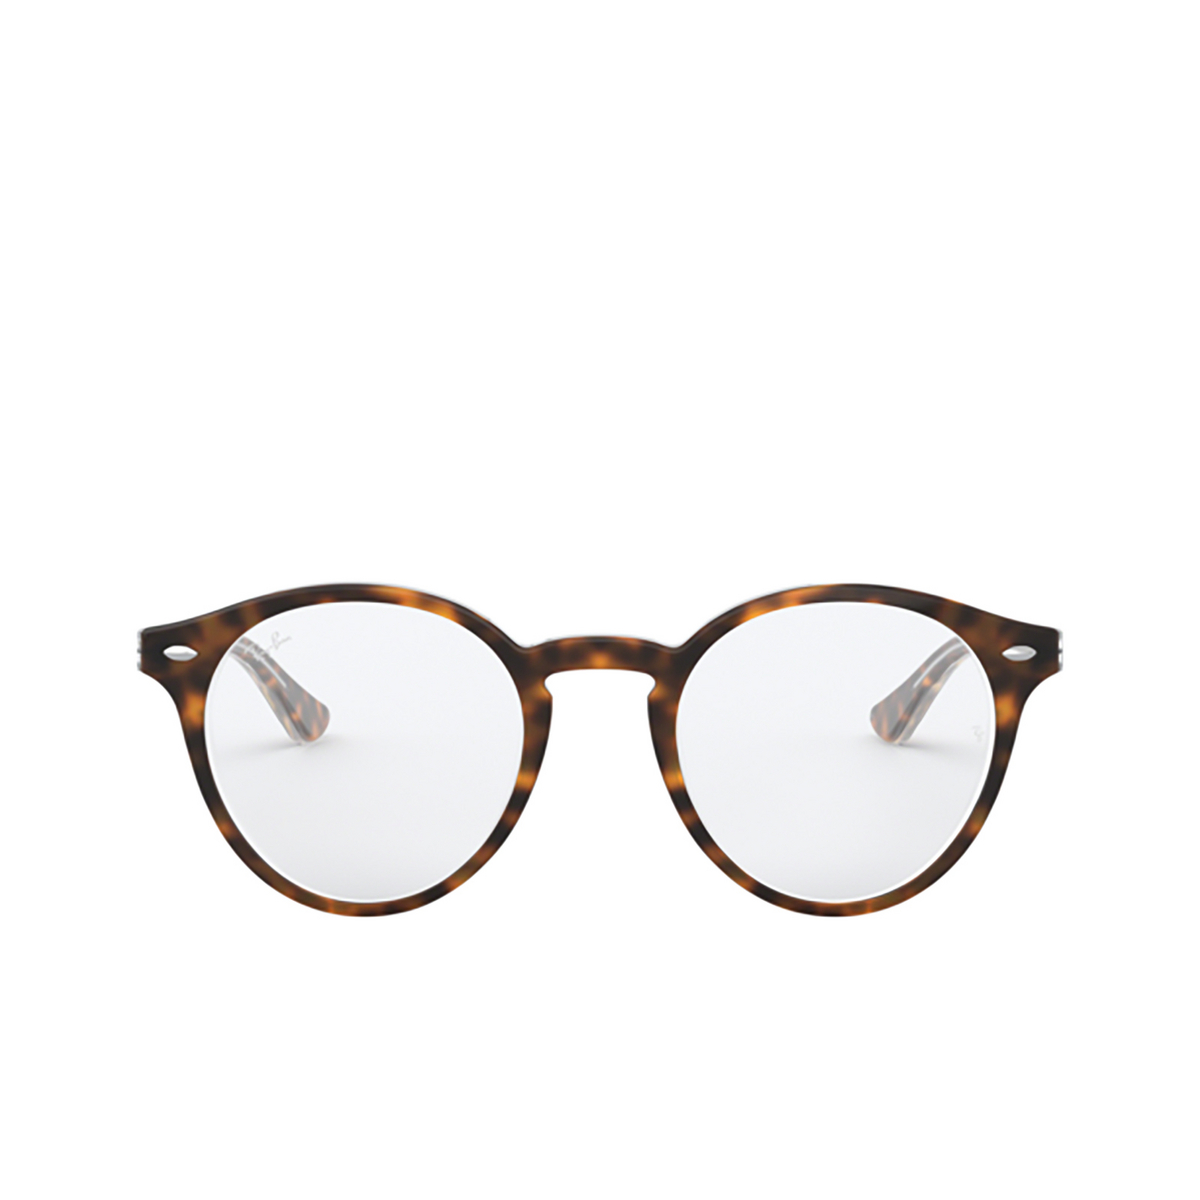 Ray-Ban RX5376 Eyeglasses 5082 TOP HAVANA ON TRANSPARENT - front view